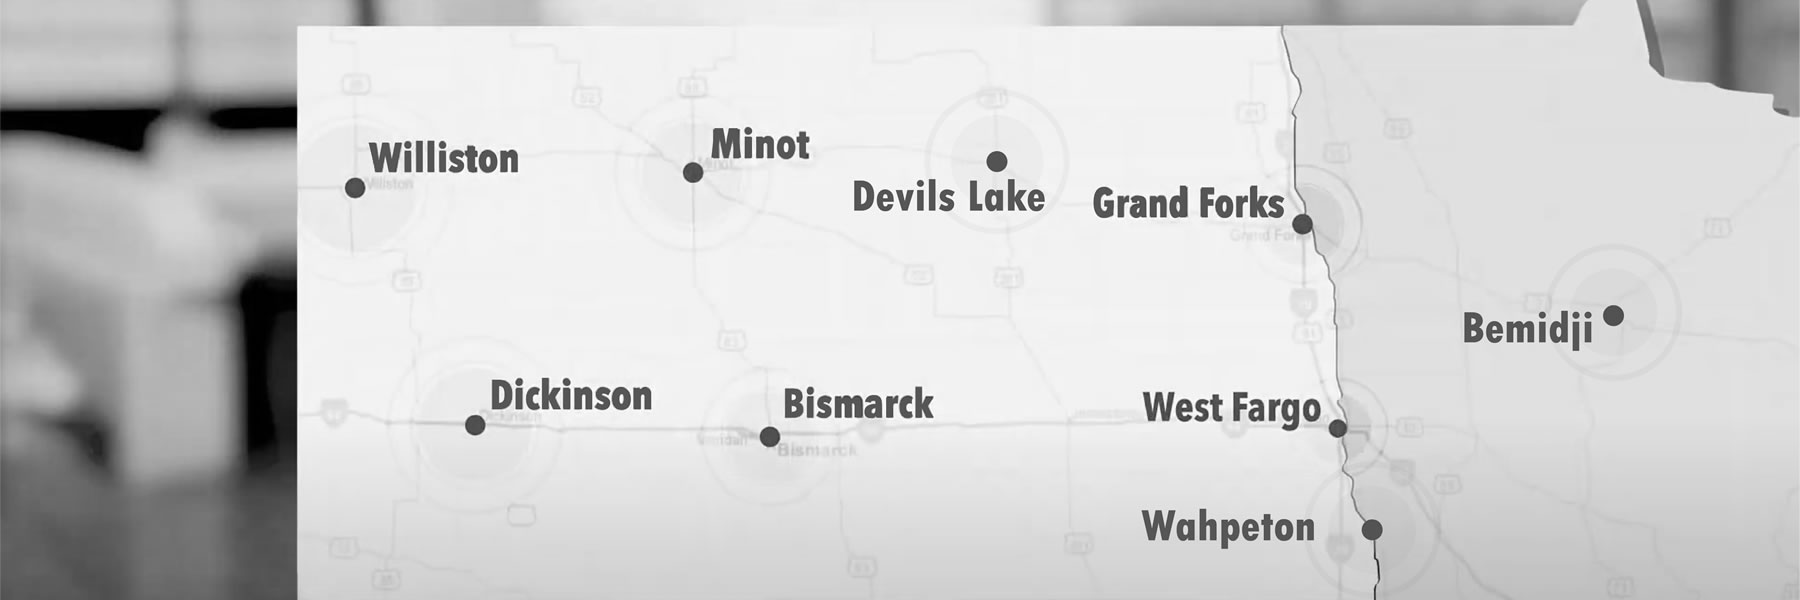 Helping businesses with office equipment and document management solutions in North Dakota and Minnesota.